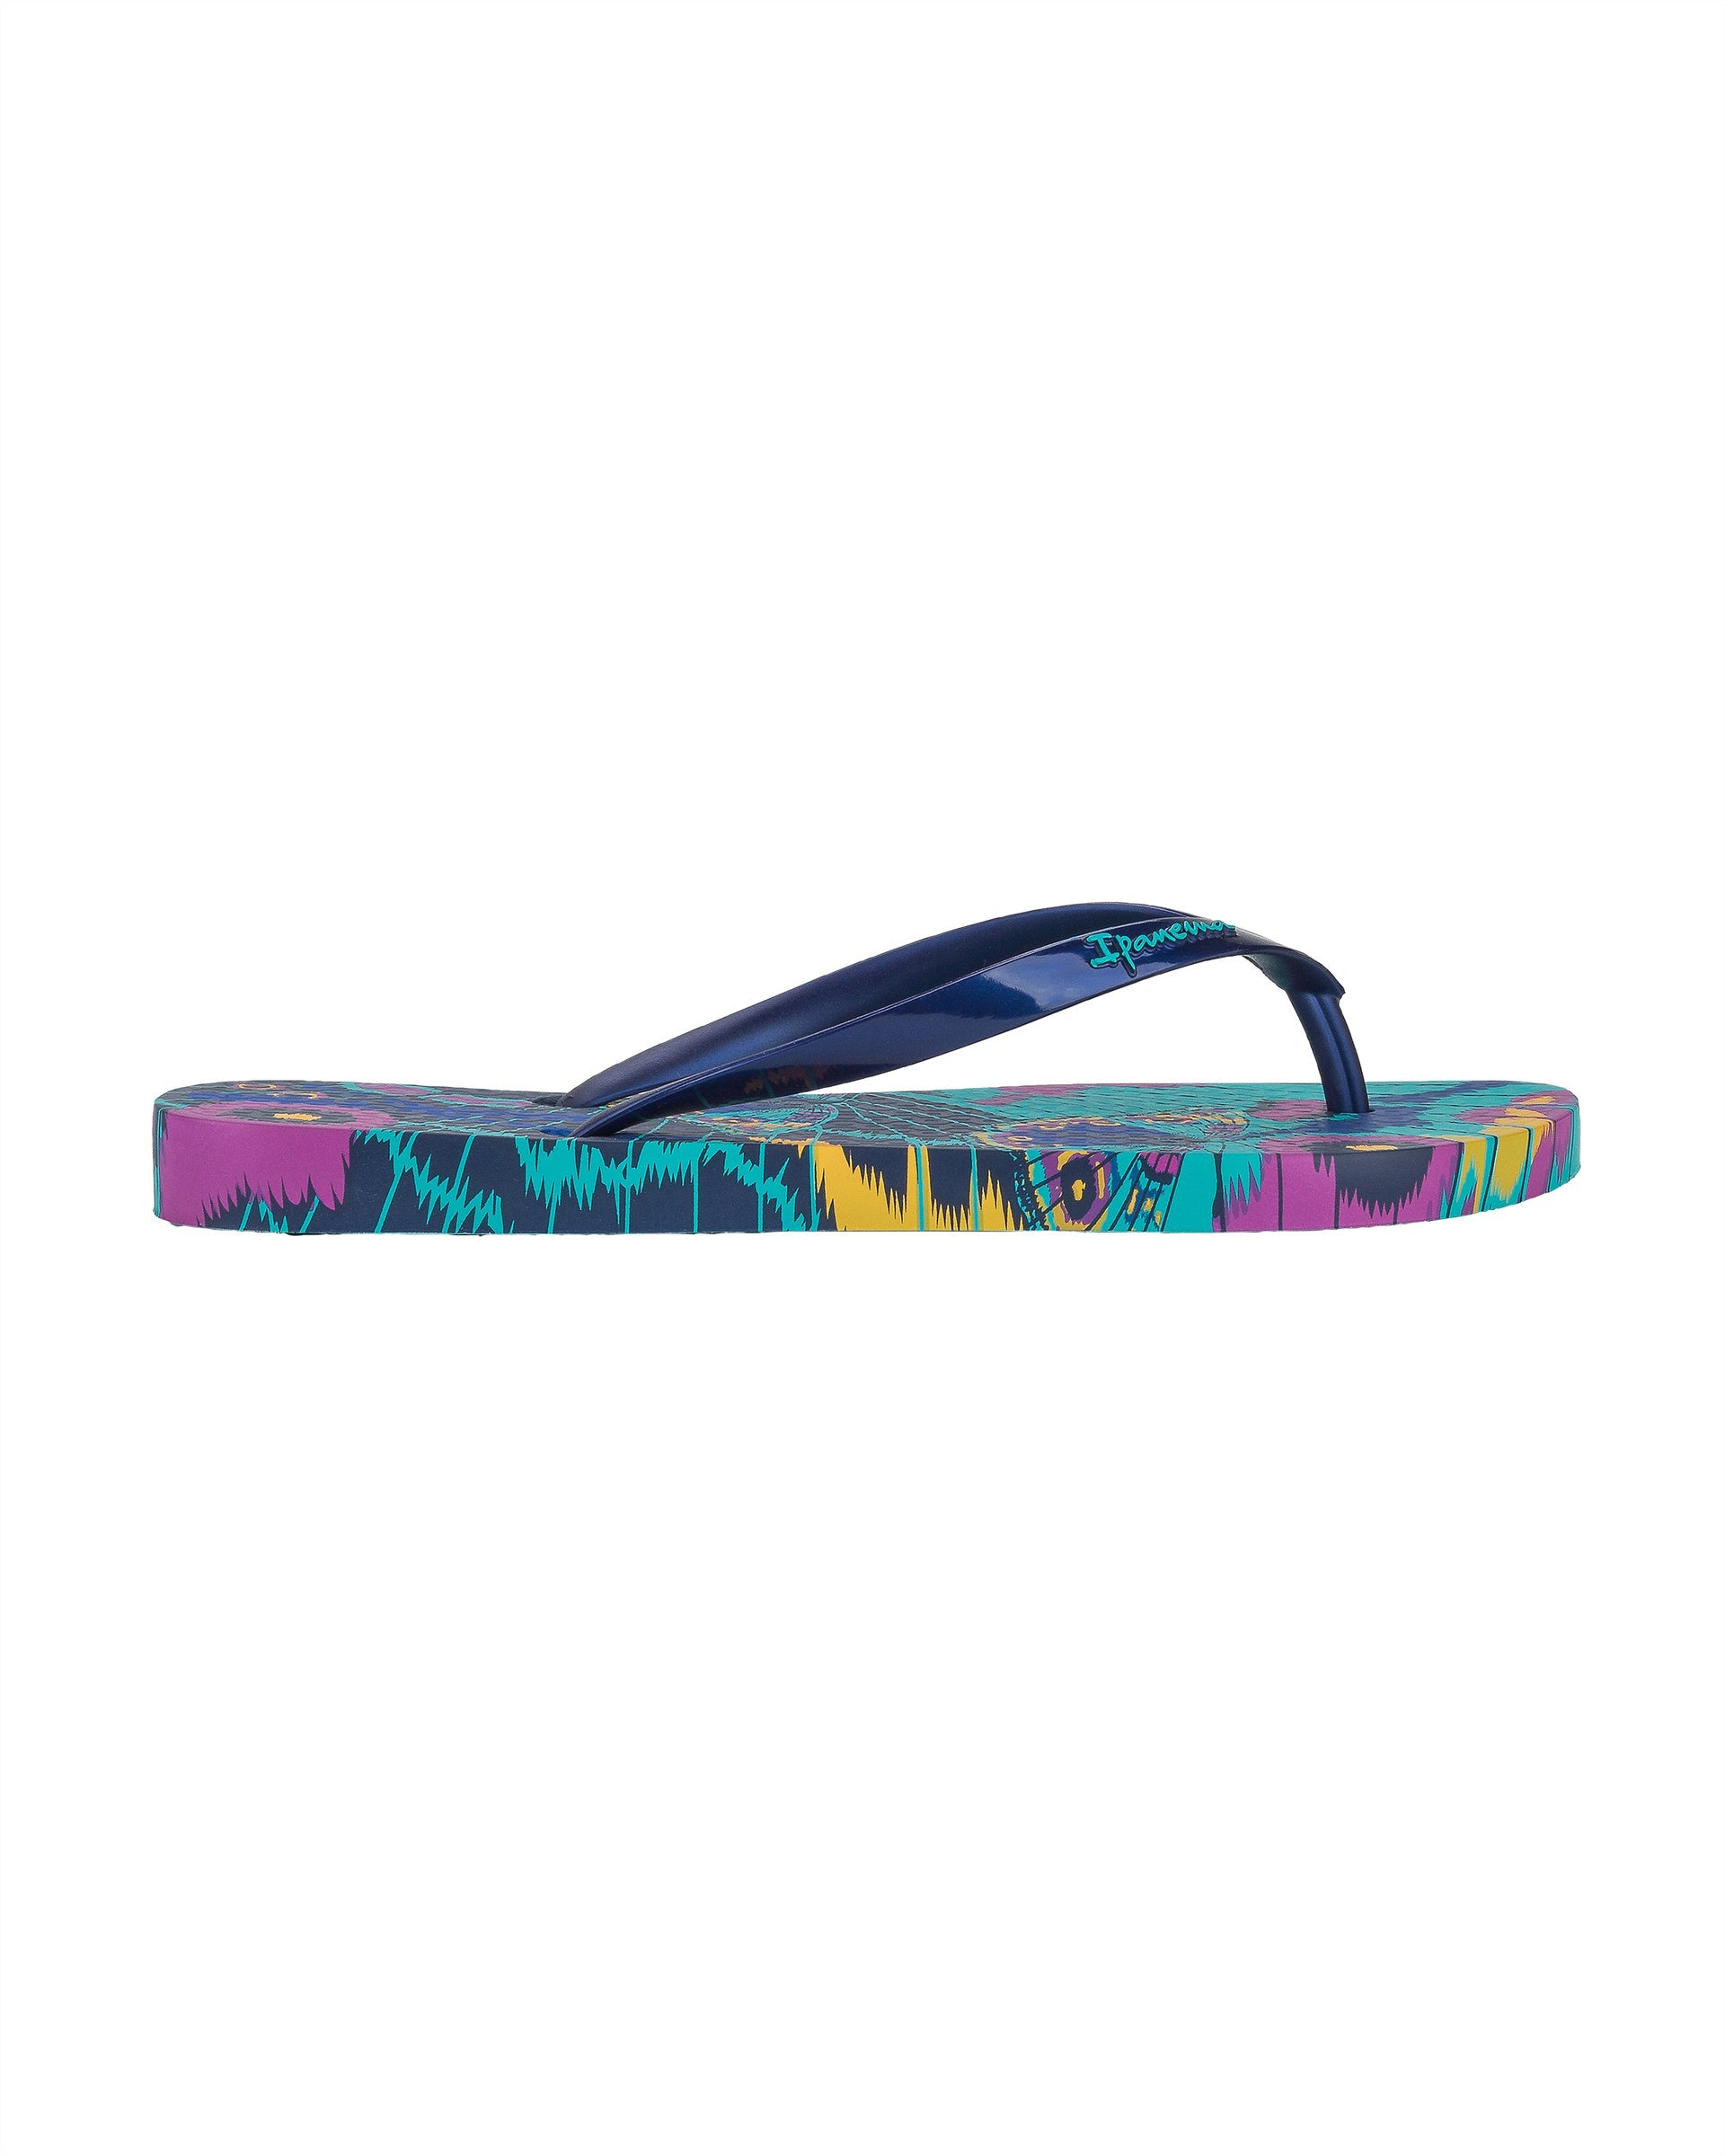 Outer side view of a blue Ipanema Animal Print women's flip flop with glitter blue straps and butterfly sole print.